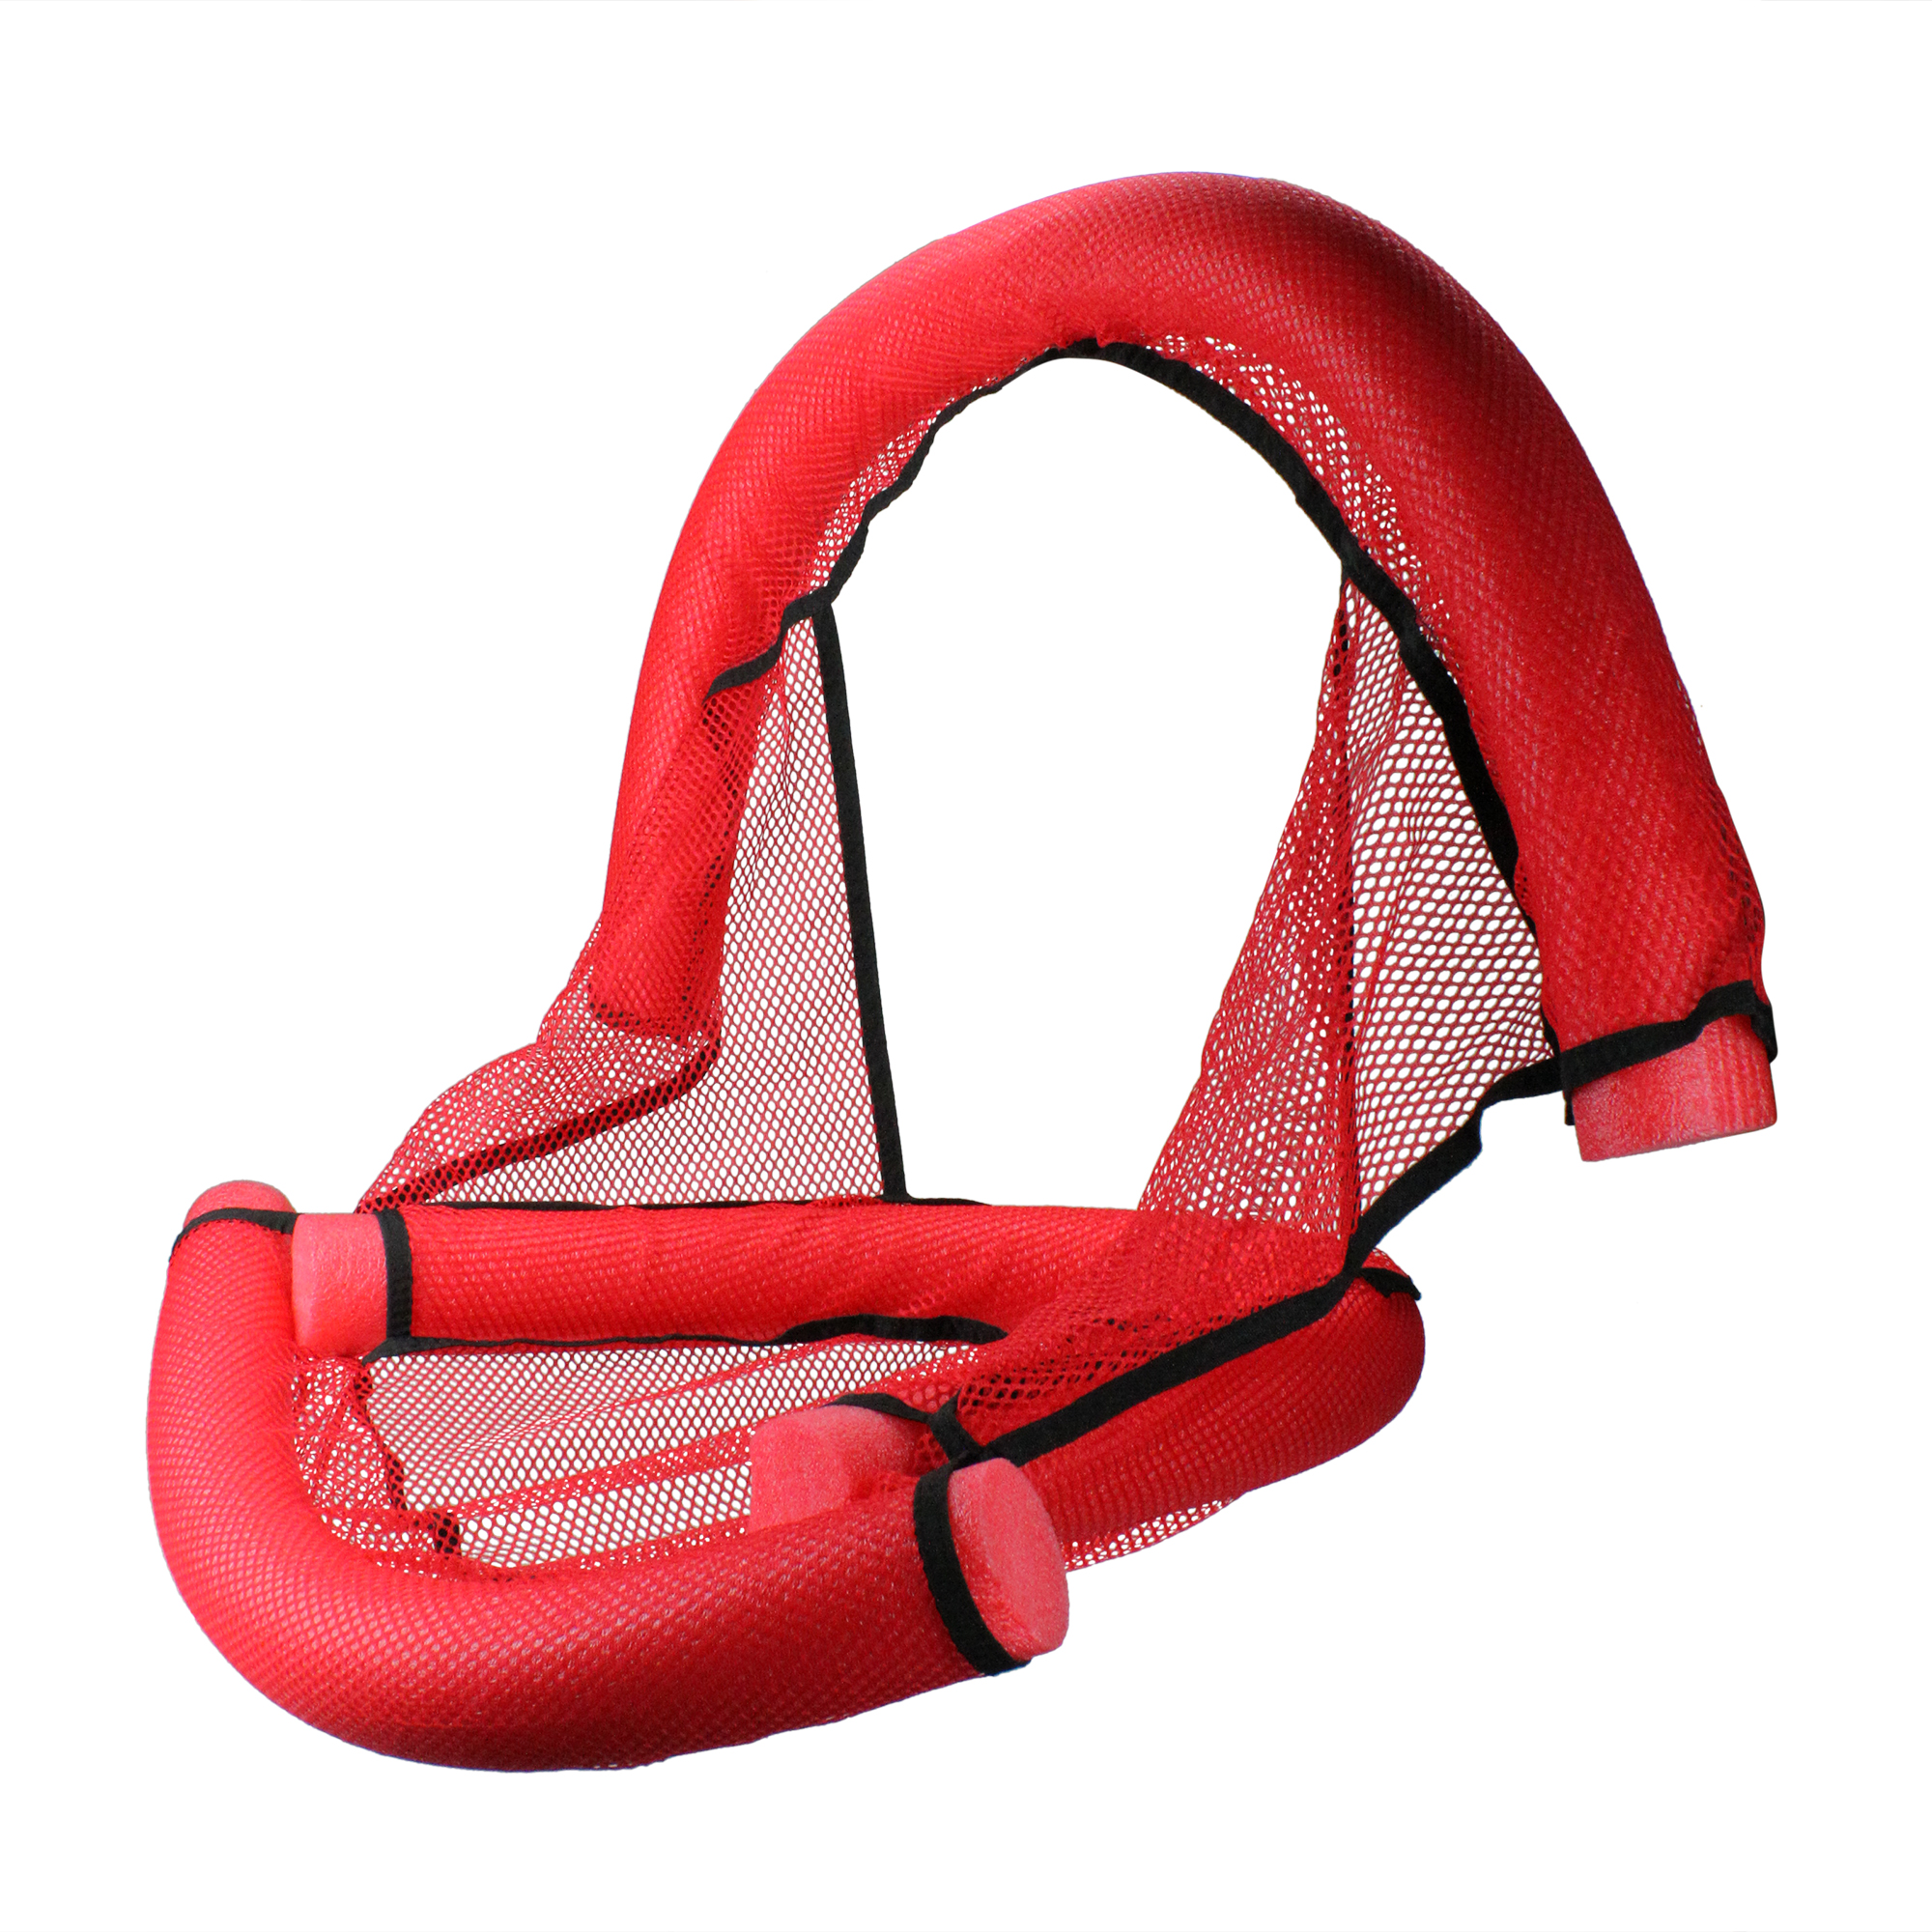 Swim Central 30" Red Water Sports Foam Noodle Fun Seat for Swimming Pool